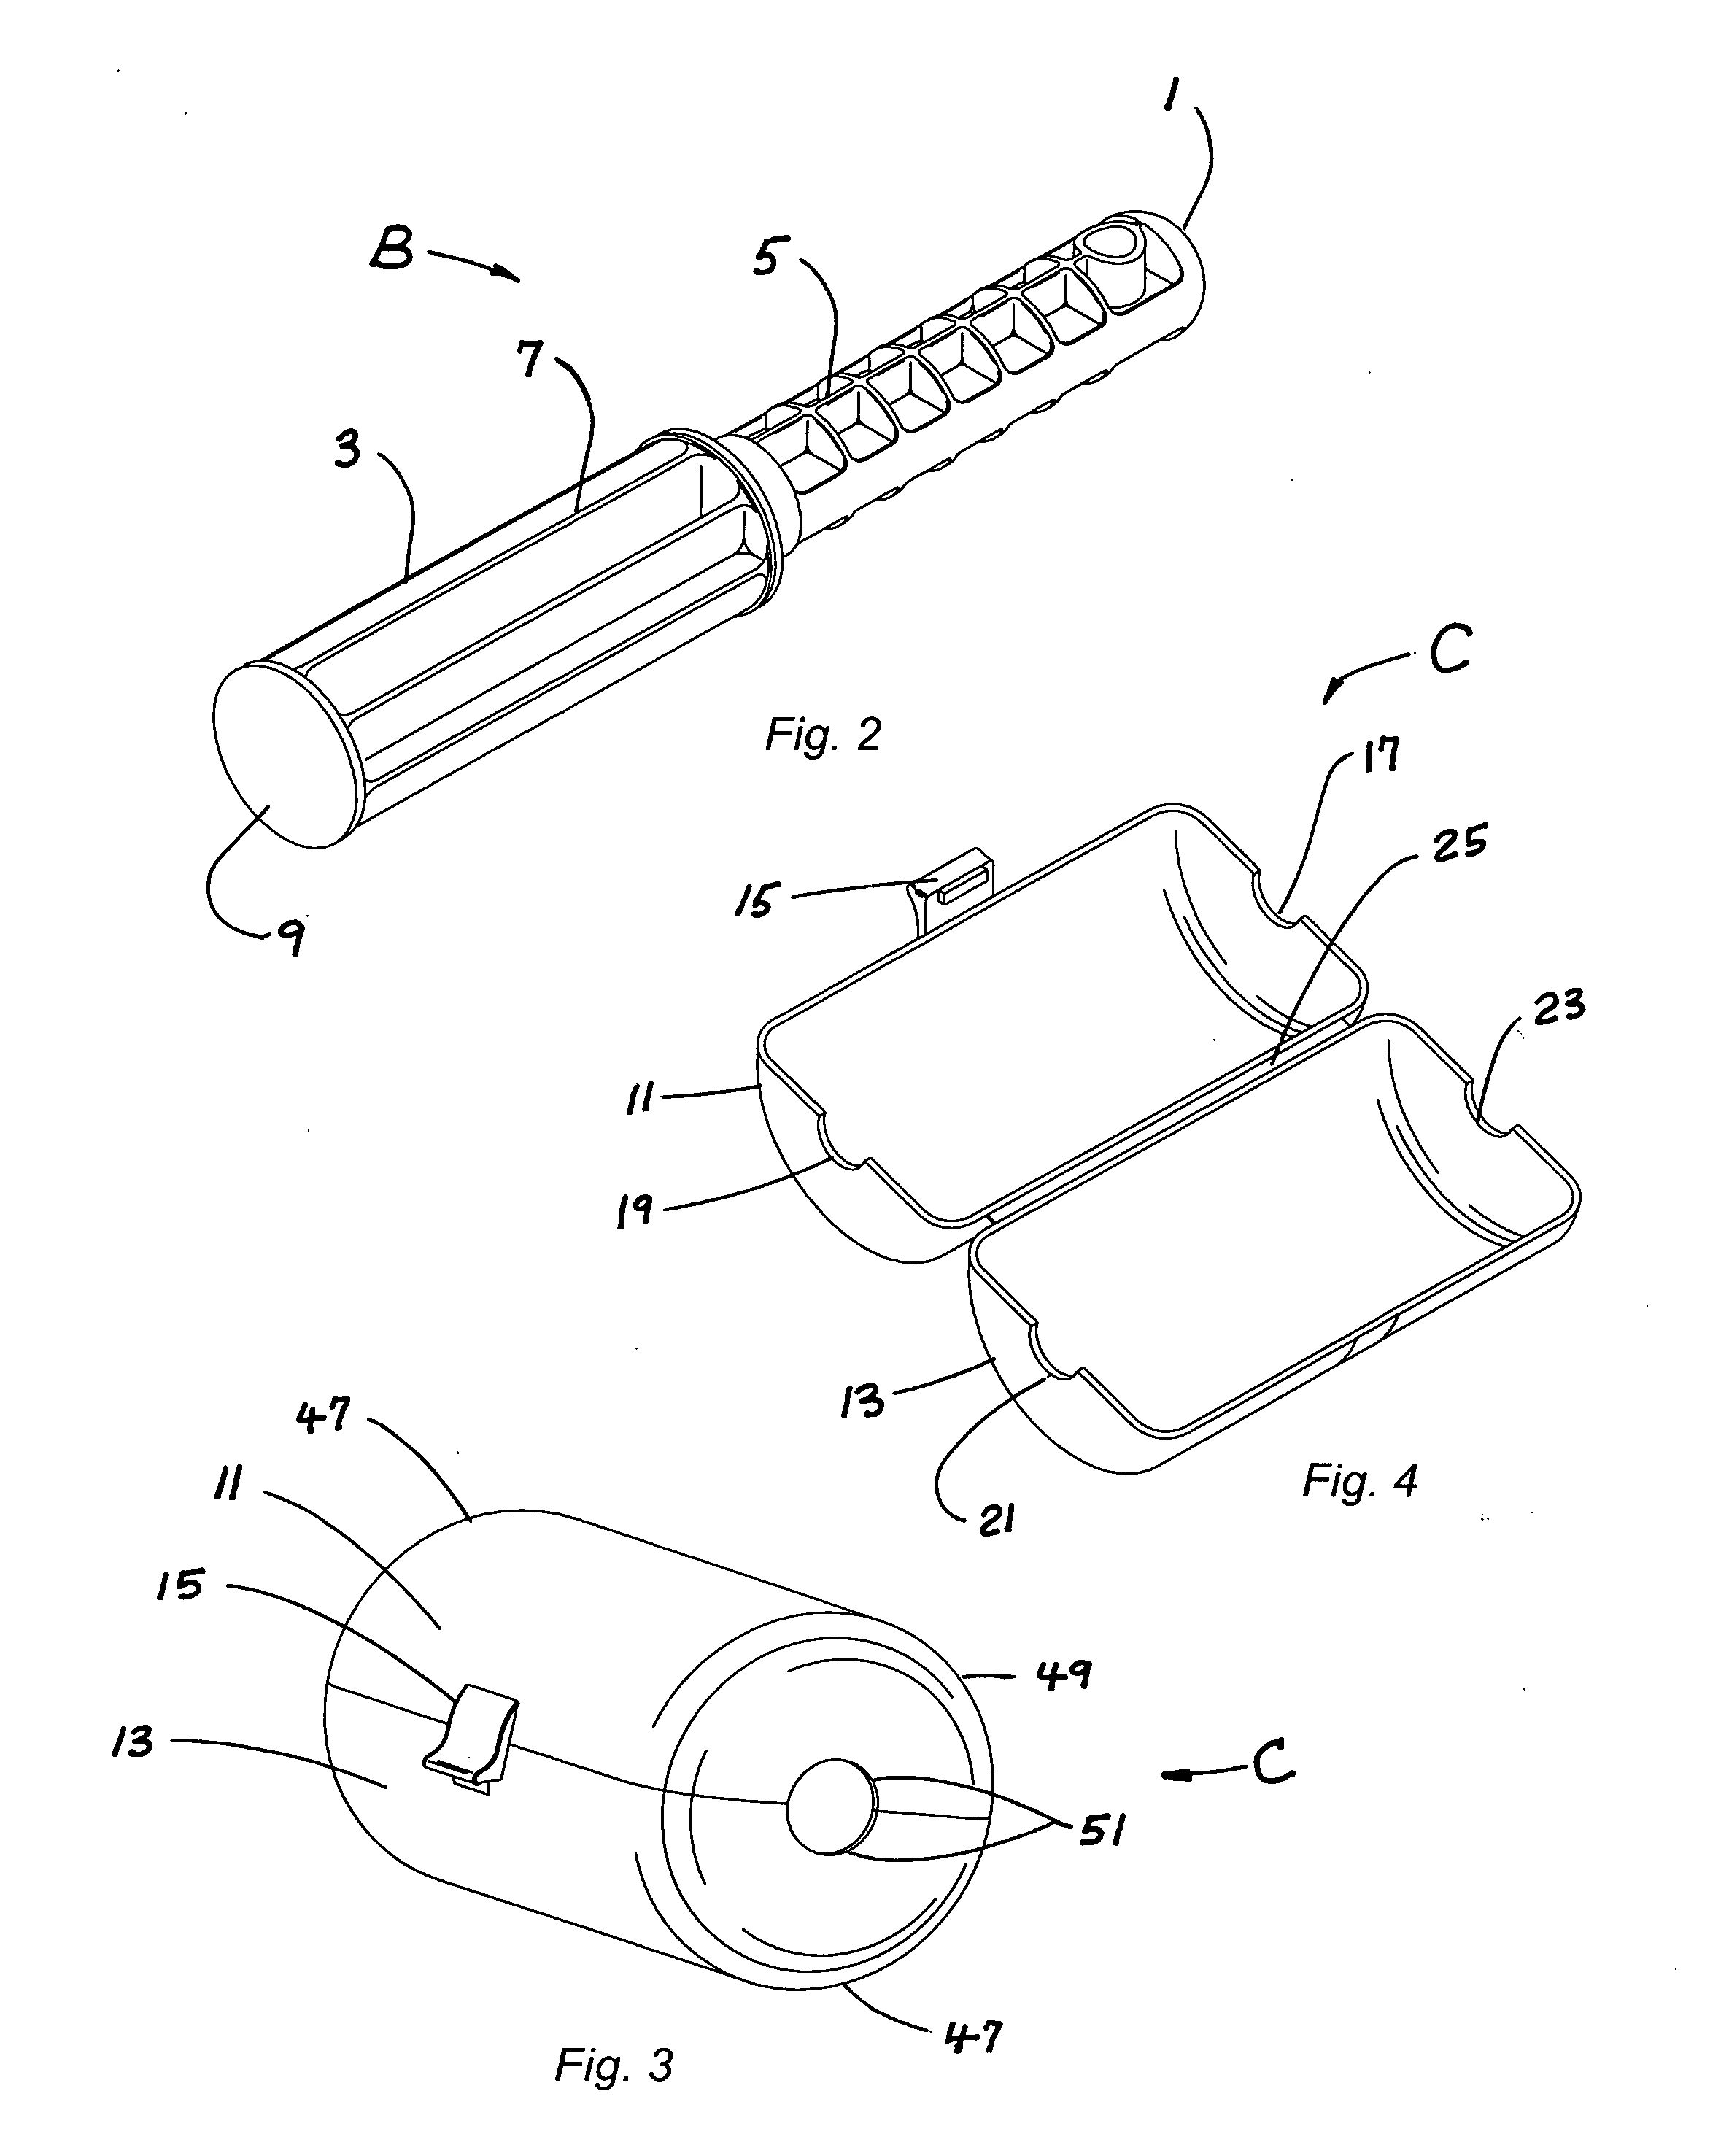 Covered lint roller assembly